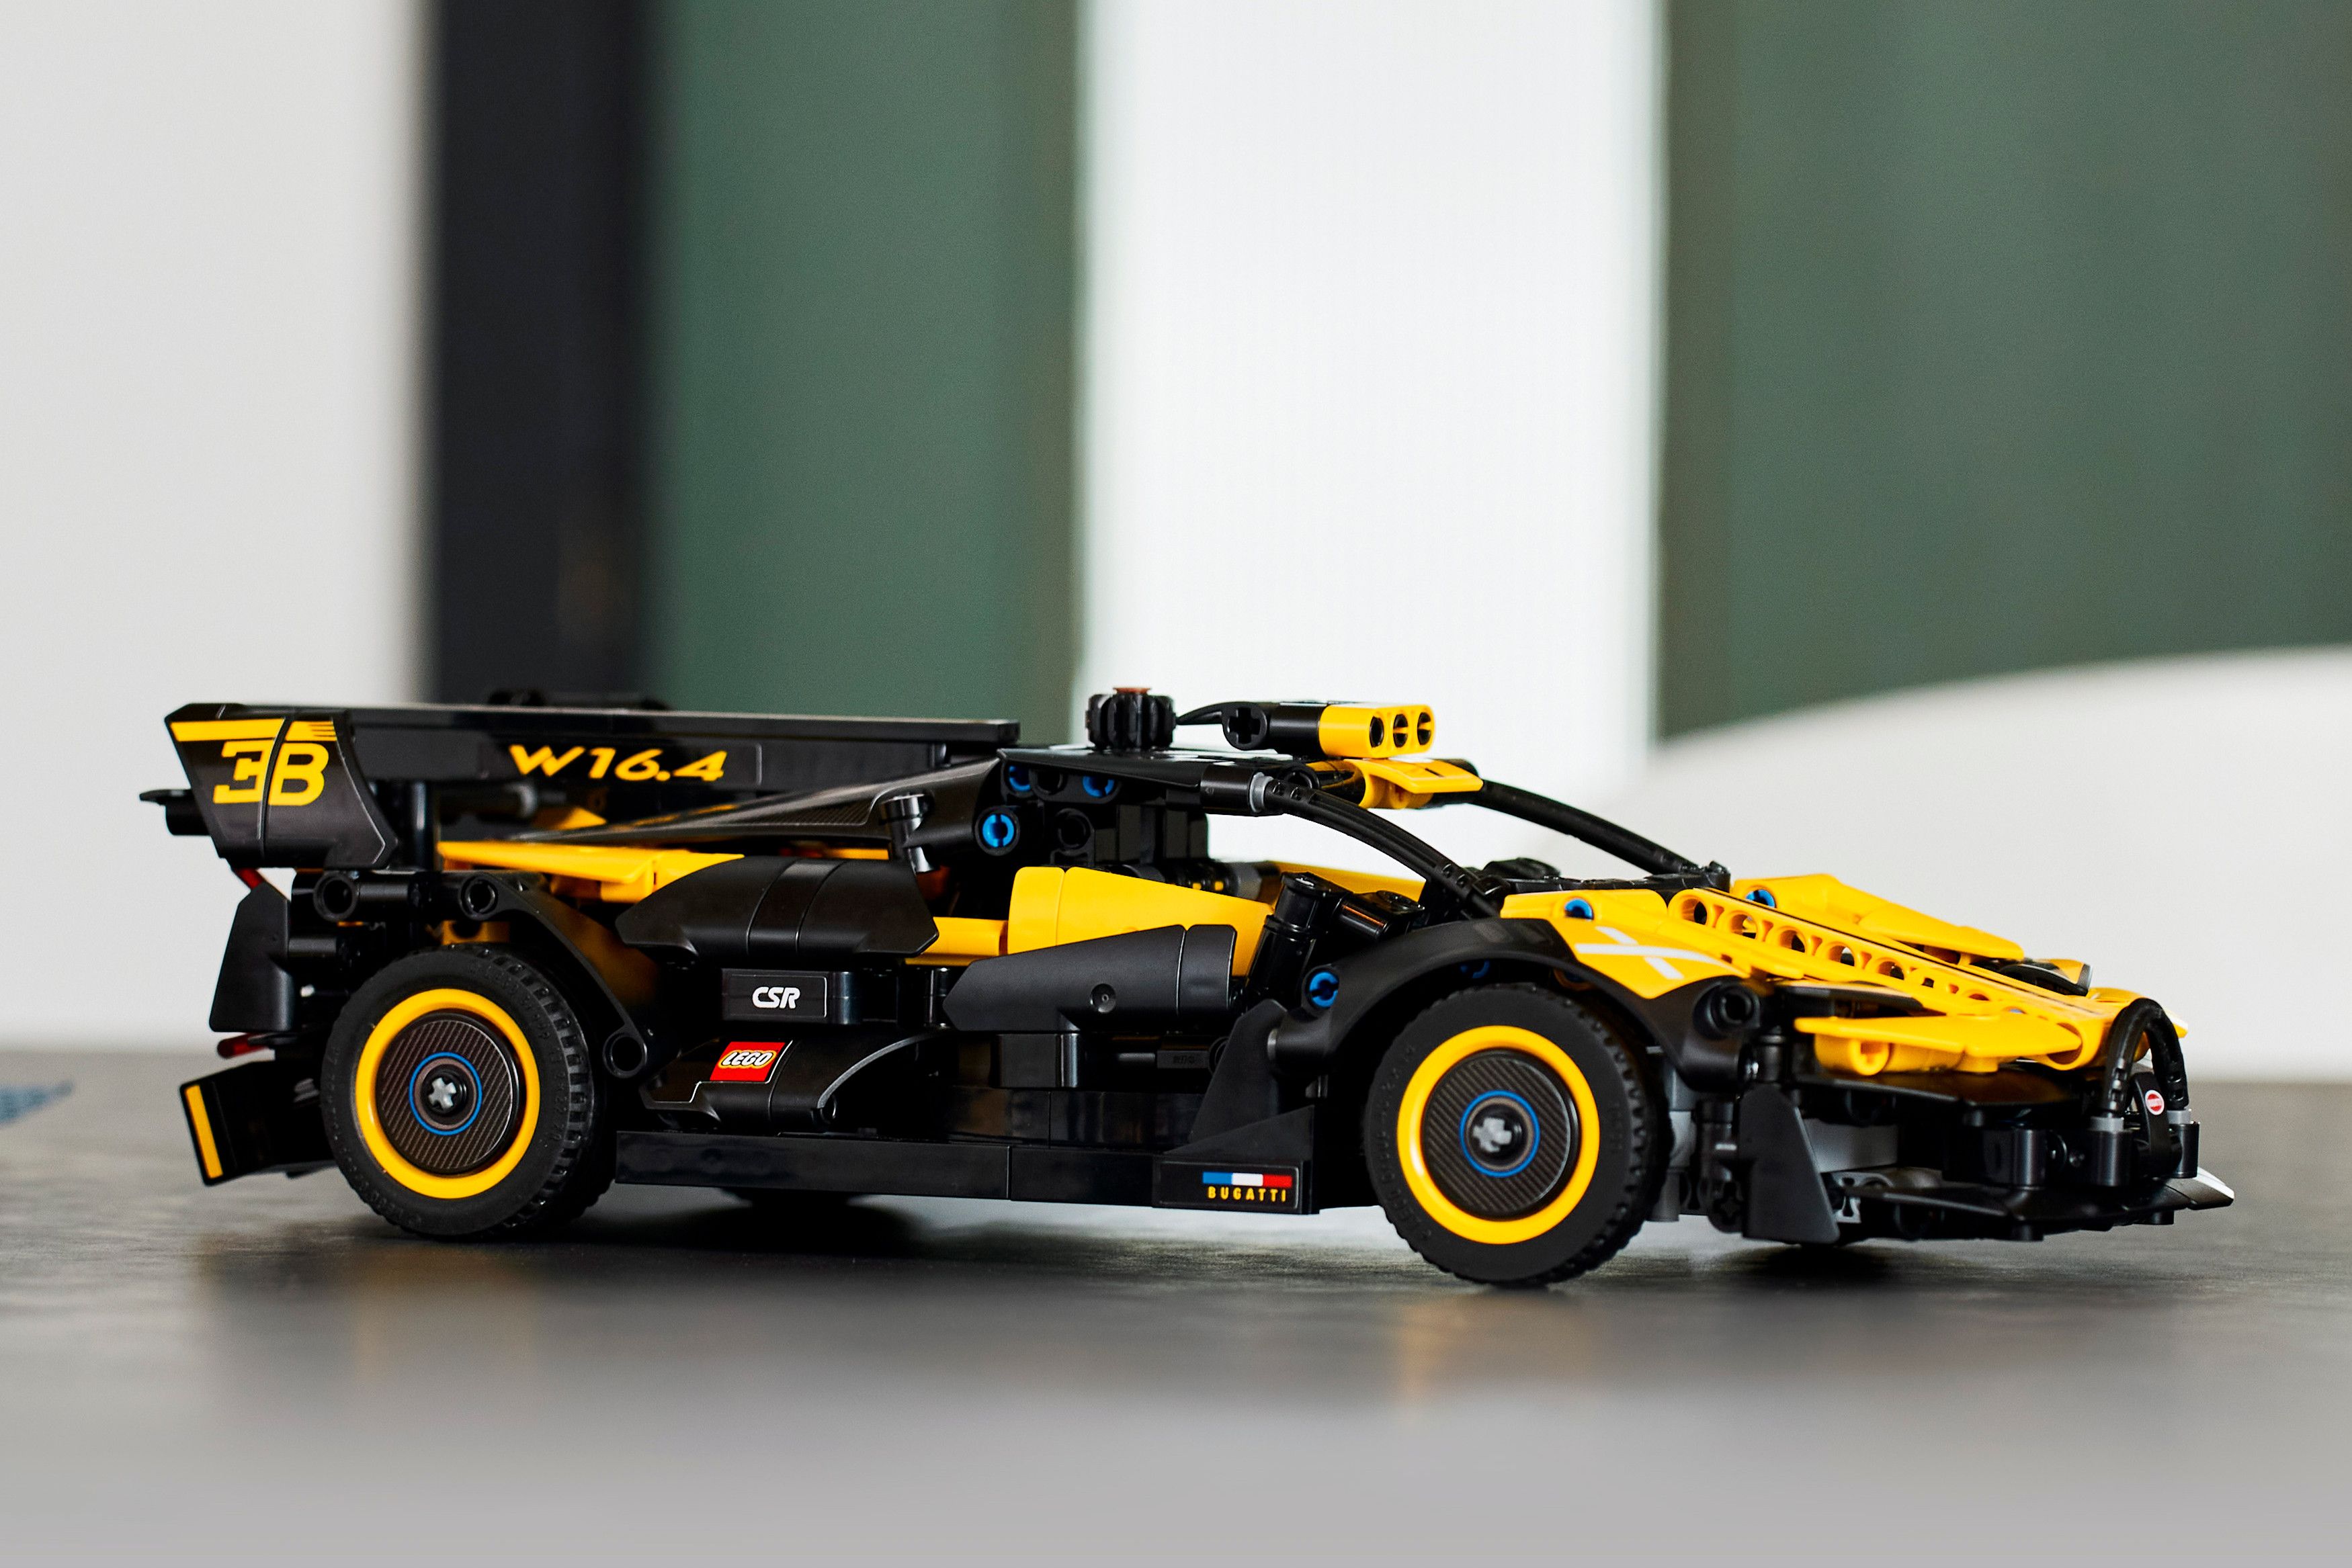 Lego Technic Bugatti Bolide Is a Supercar You Can Build at Home